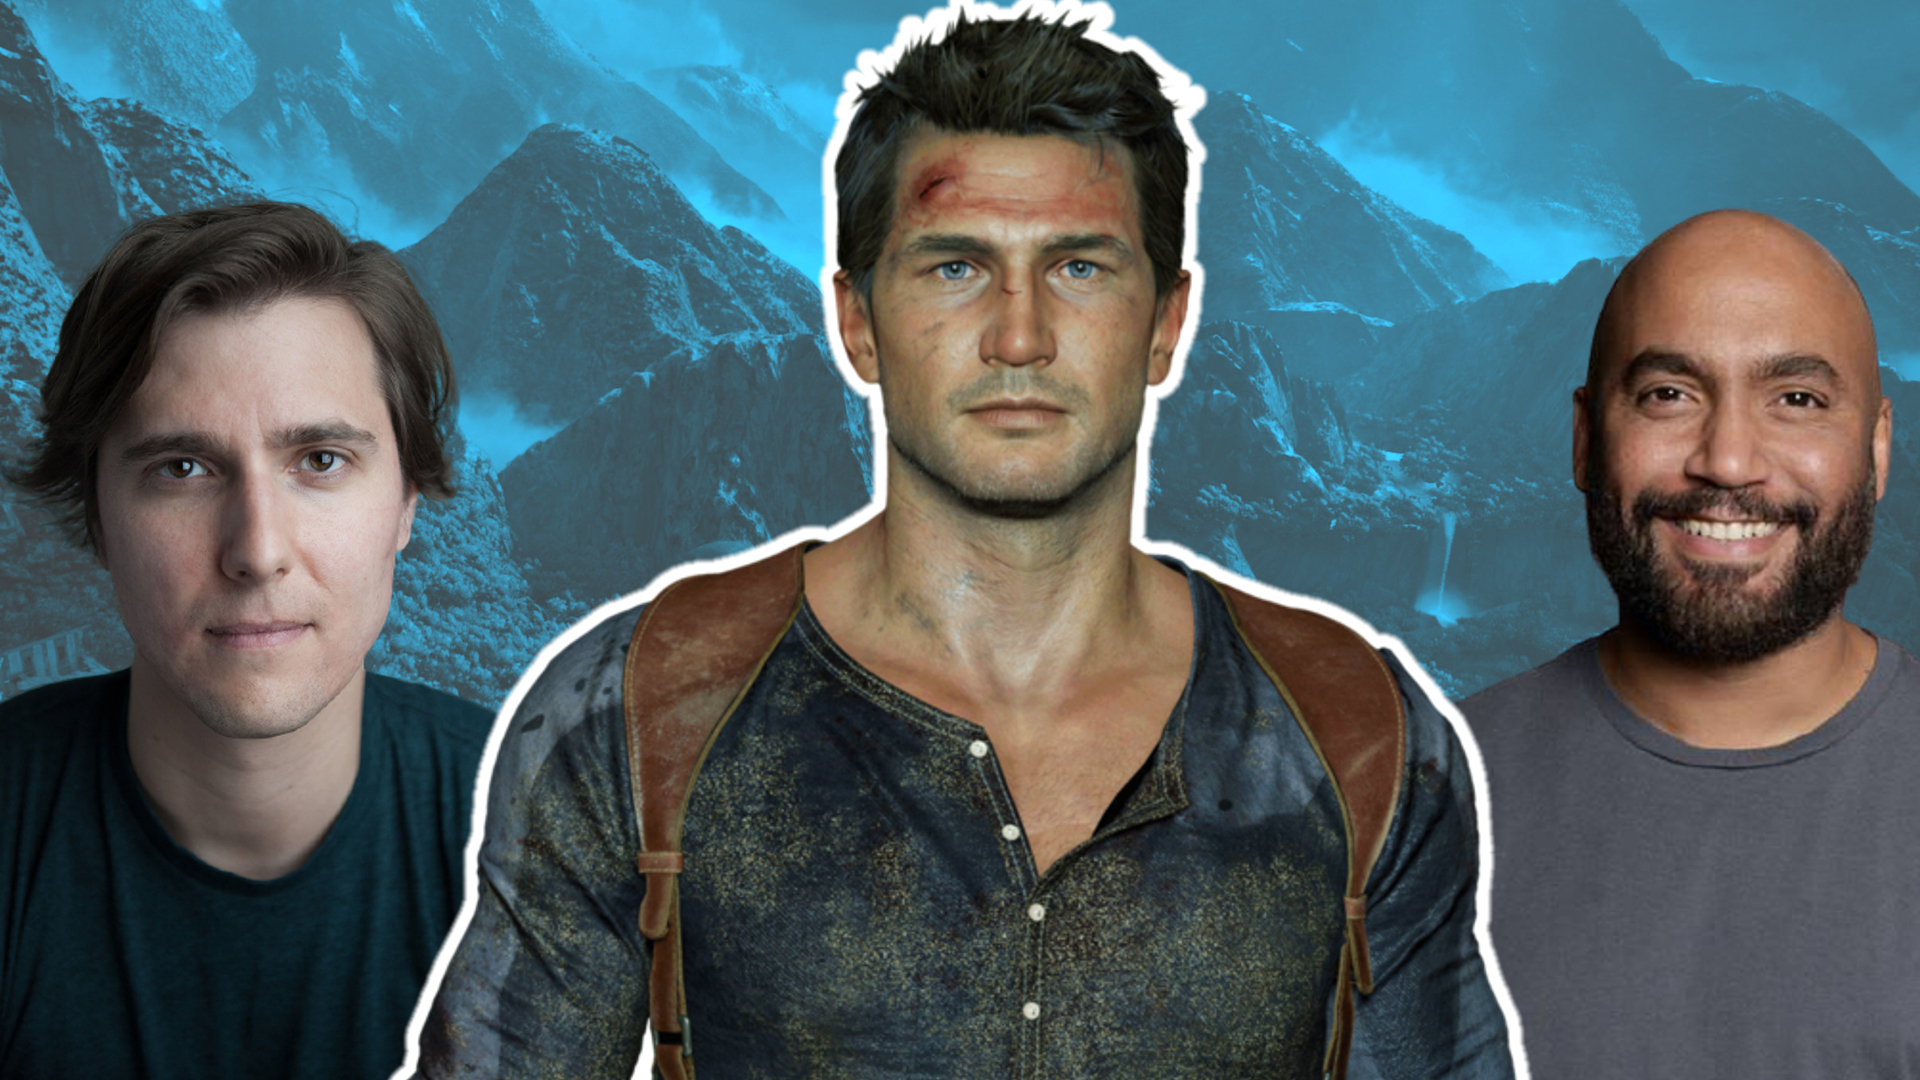 Uncharted: Legacy of Thieves Collection PC review -- Old treasures